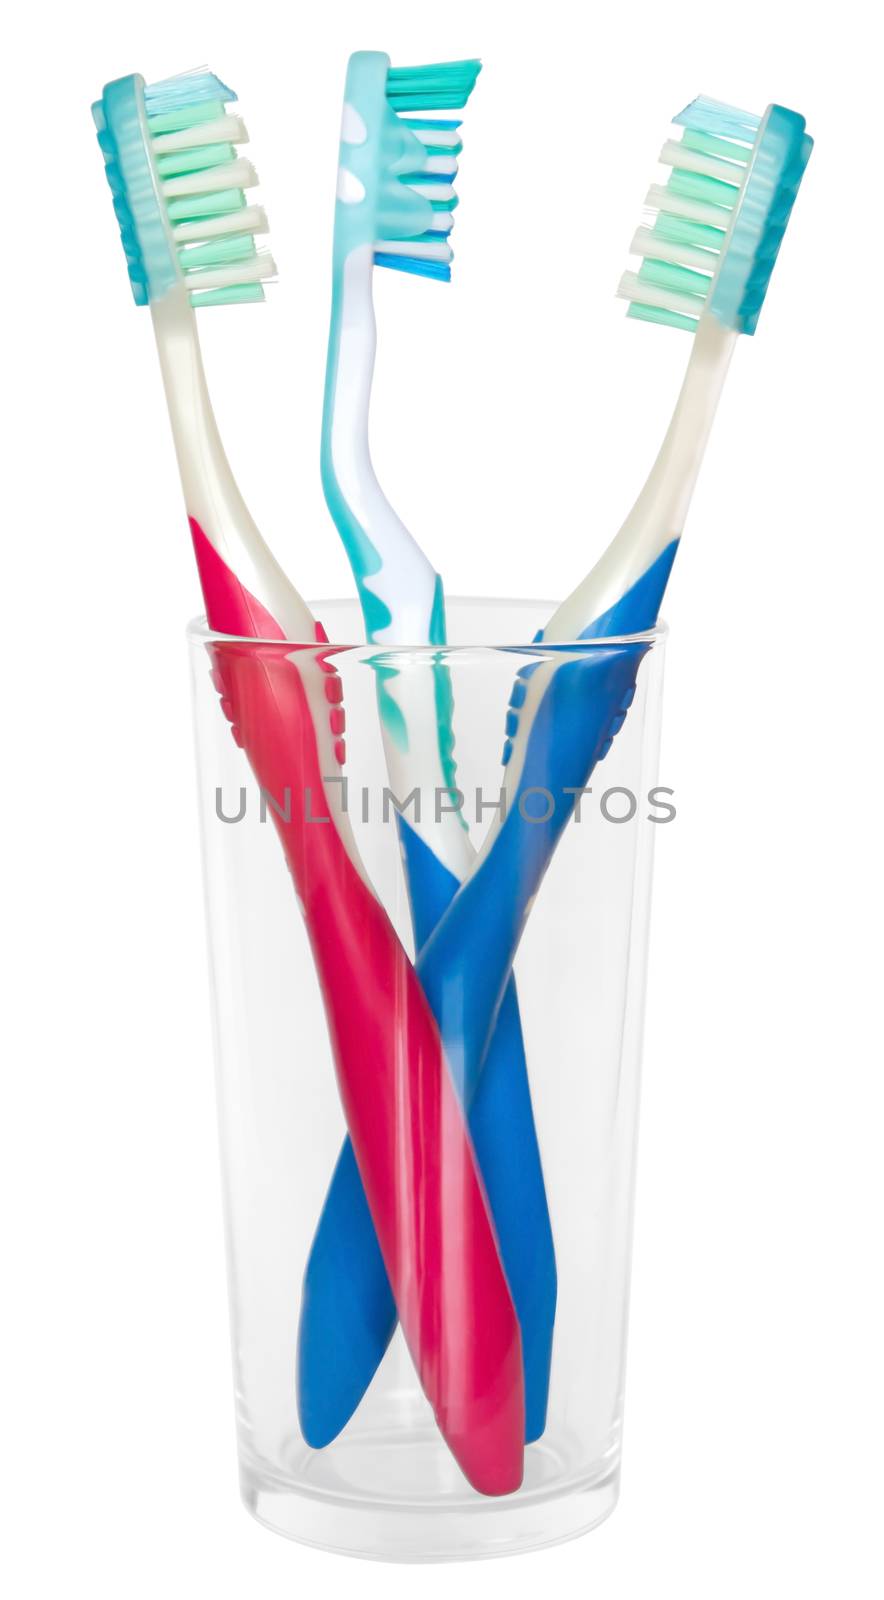 Three tooth brushes in glass. Isolated on white background. Clipping path.